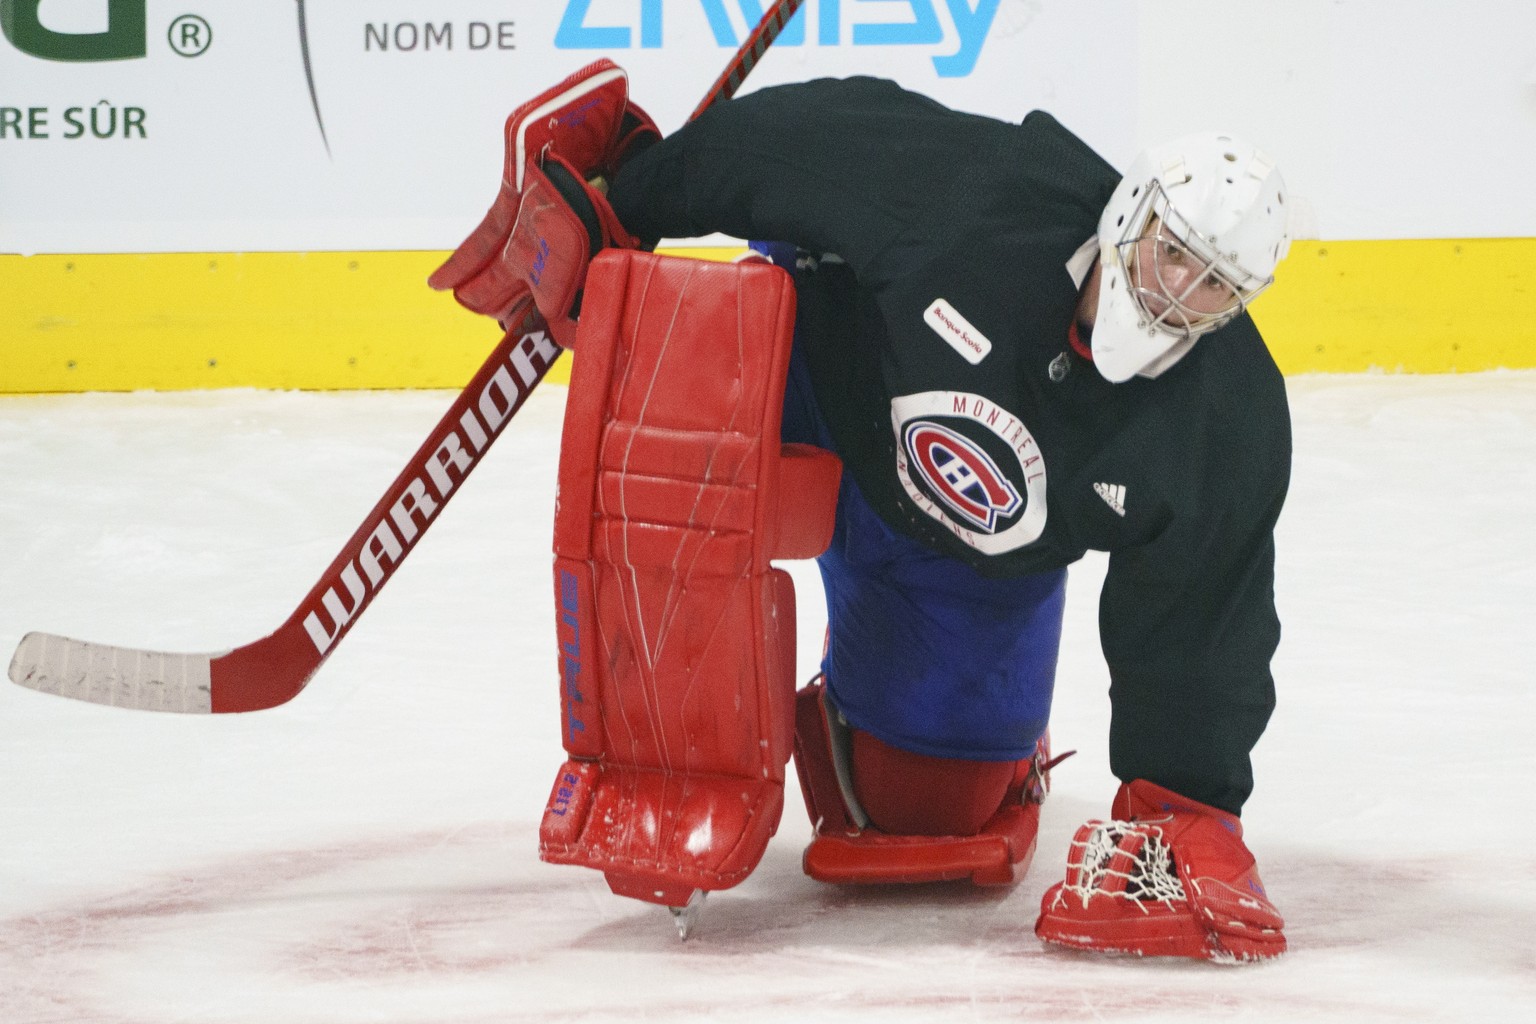 Montreal Canadiens goaltender Carey Price stretches during an NHL hockey practice in Brossard, Quebec, Tuesday, Jan. 5, 2021. (Paul Chiasson/The Canadian Press via AP)